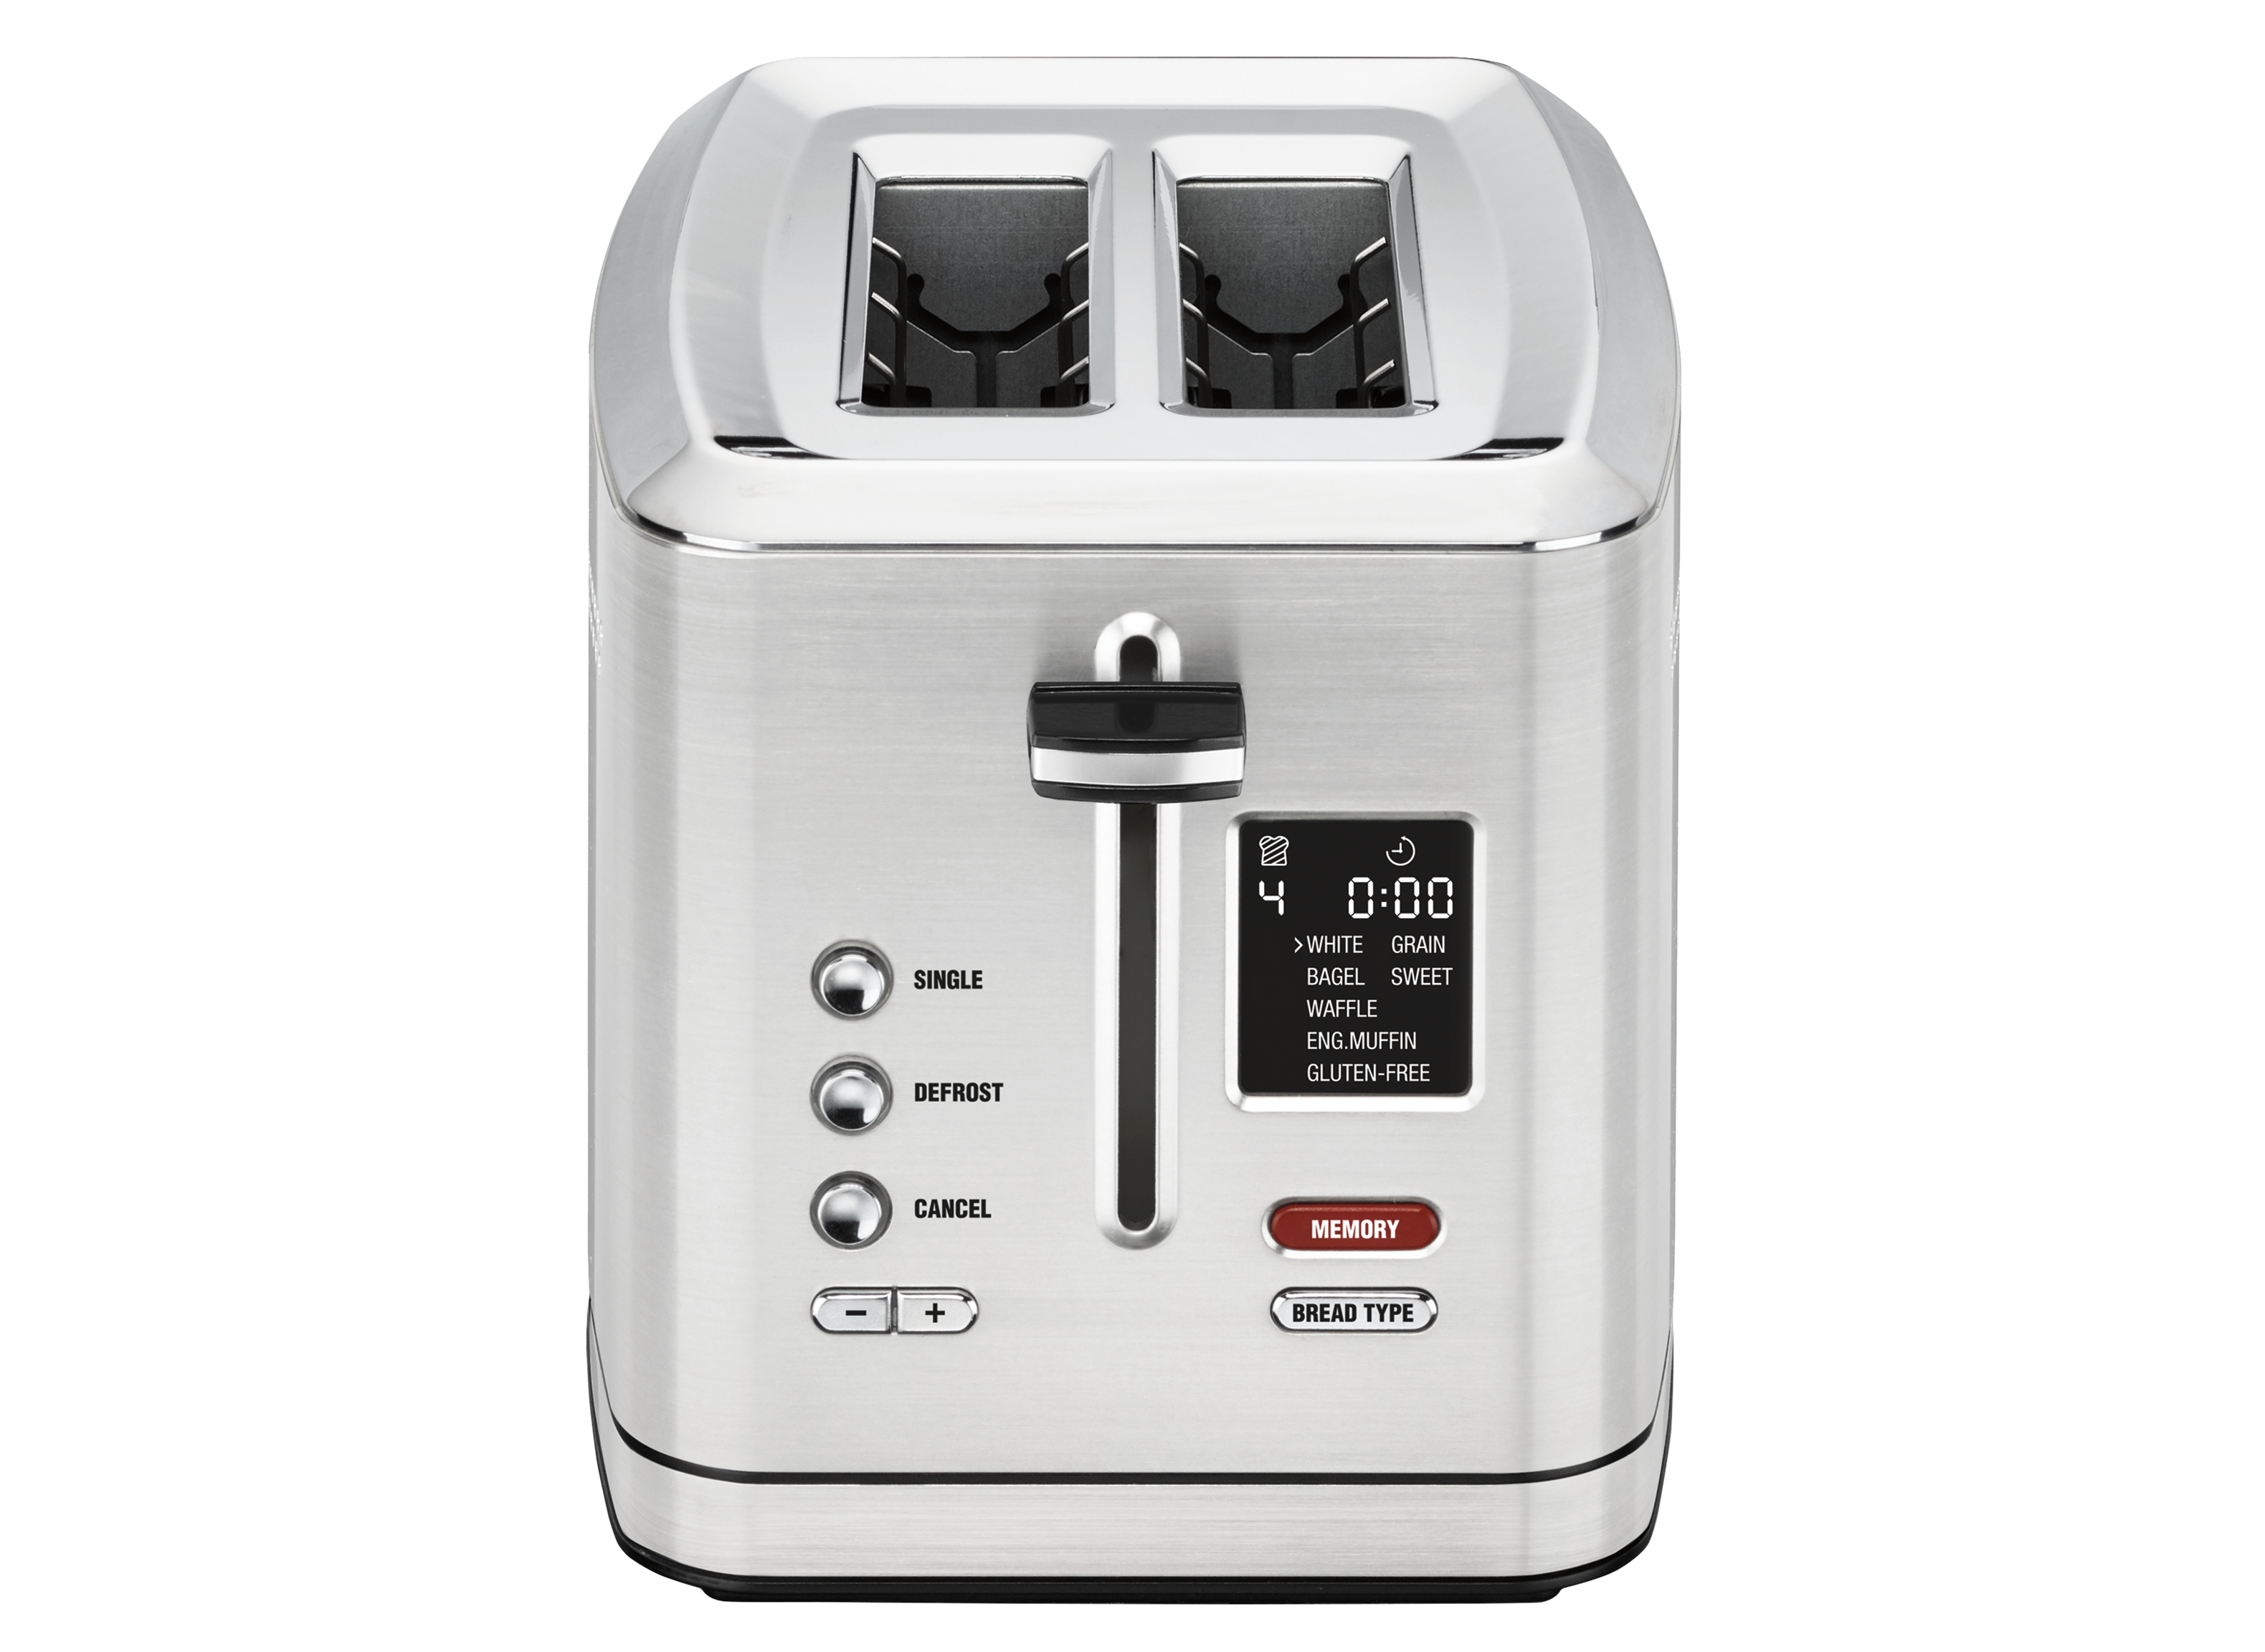 Cuisinart CPT-T20 Touchscreen 2-Slice Toaster & Toaster Oven Review -  Consumer Reports